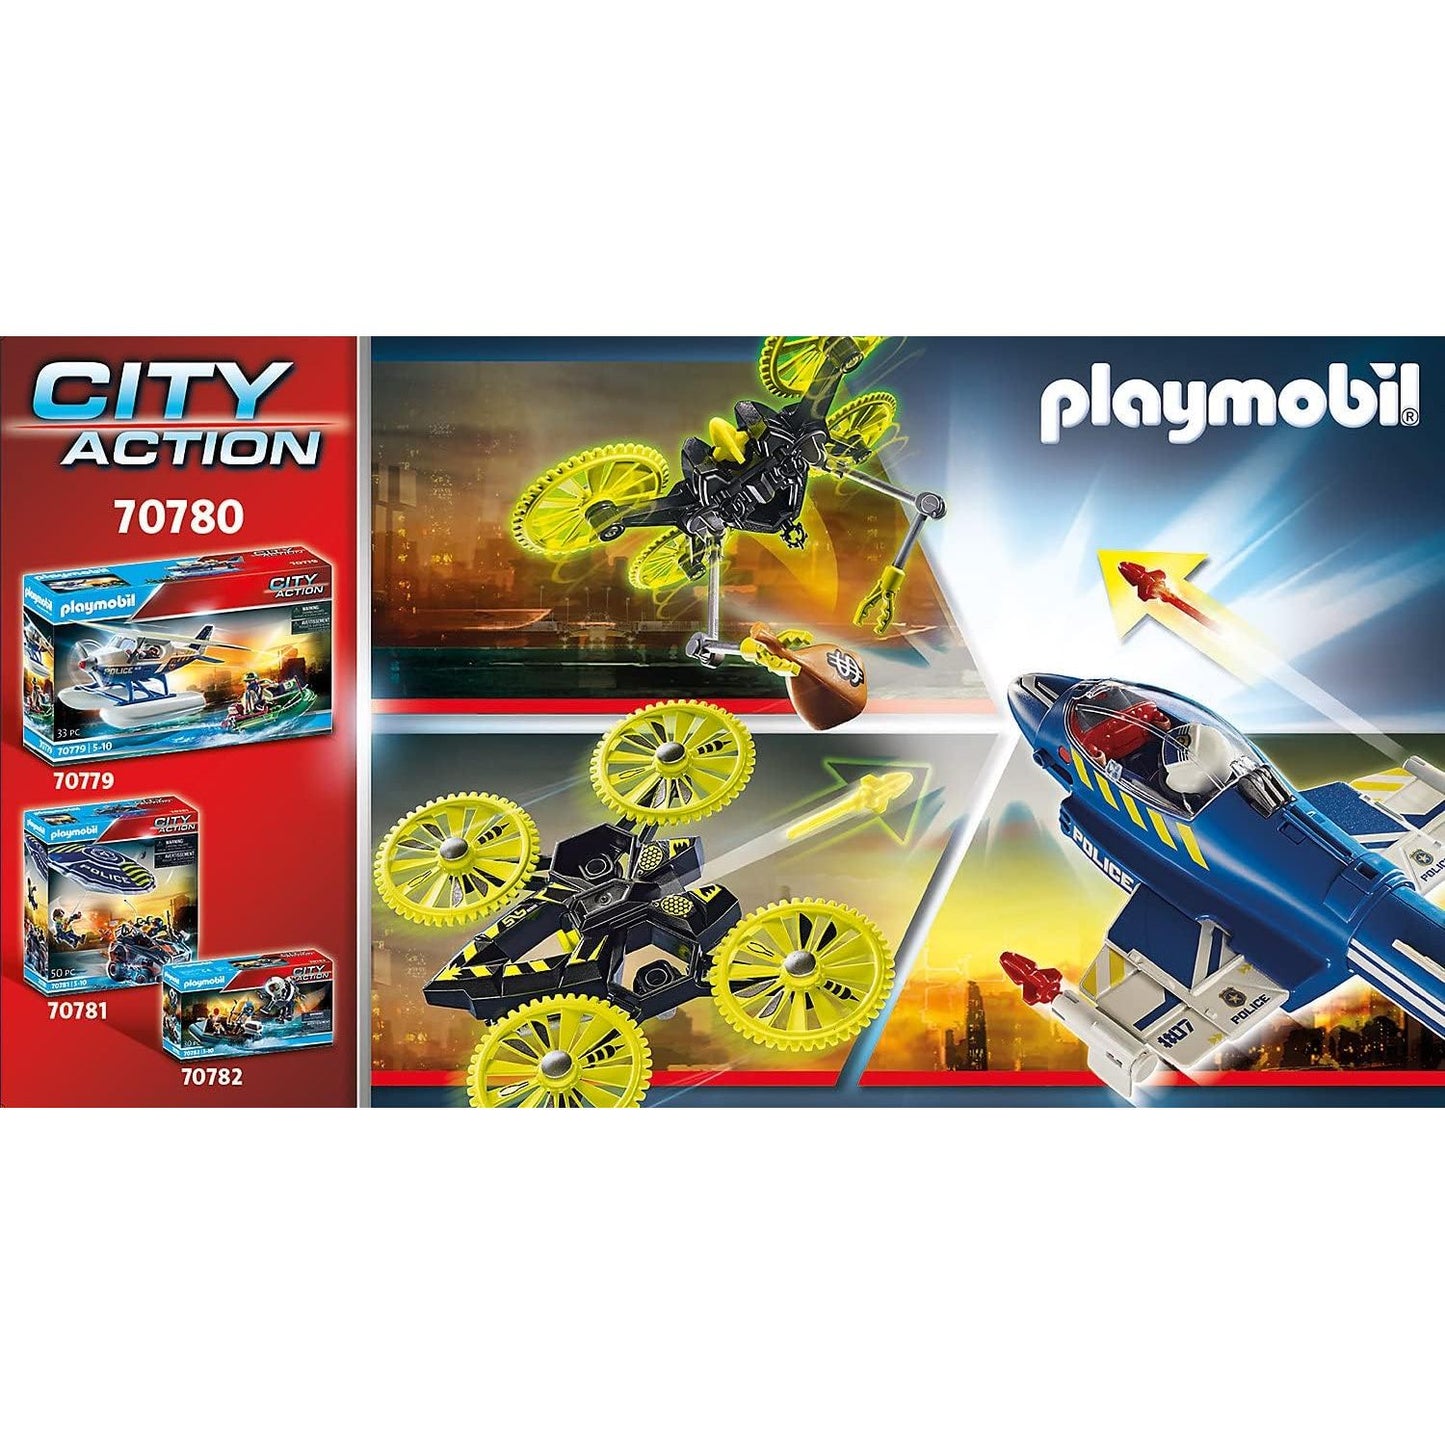 City Action Police Jet with Drone